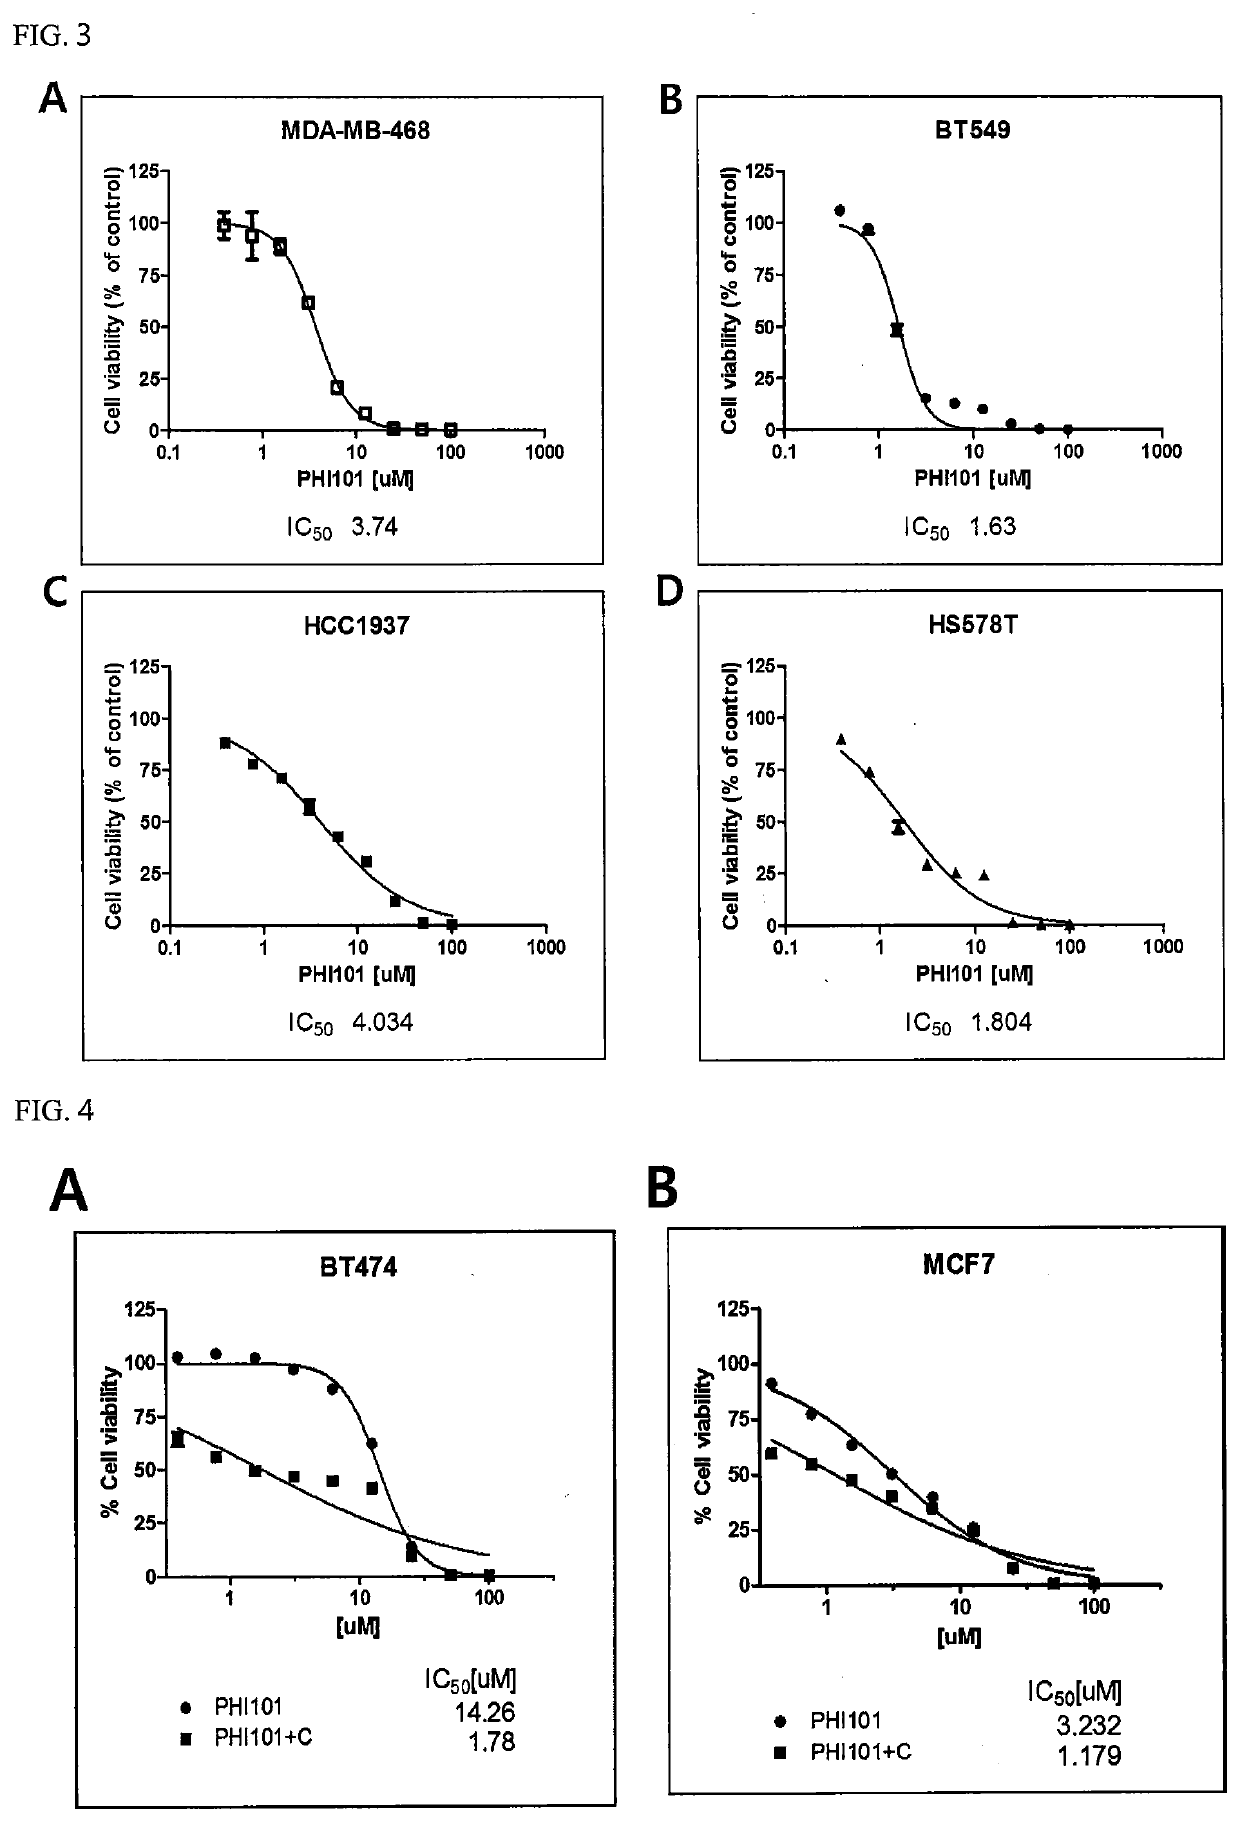 Use of 2,3,5-substituted thiophene compound to prevent, ameliorate, or treat breast cancers